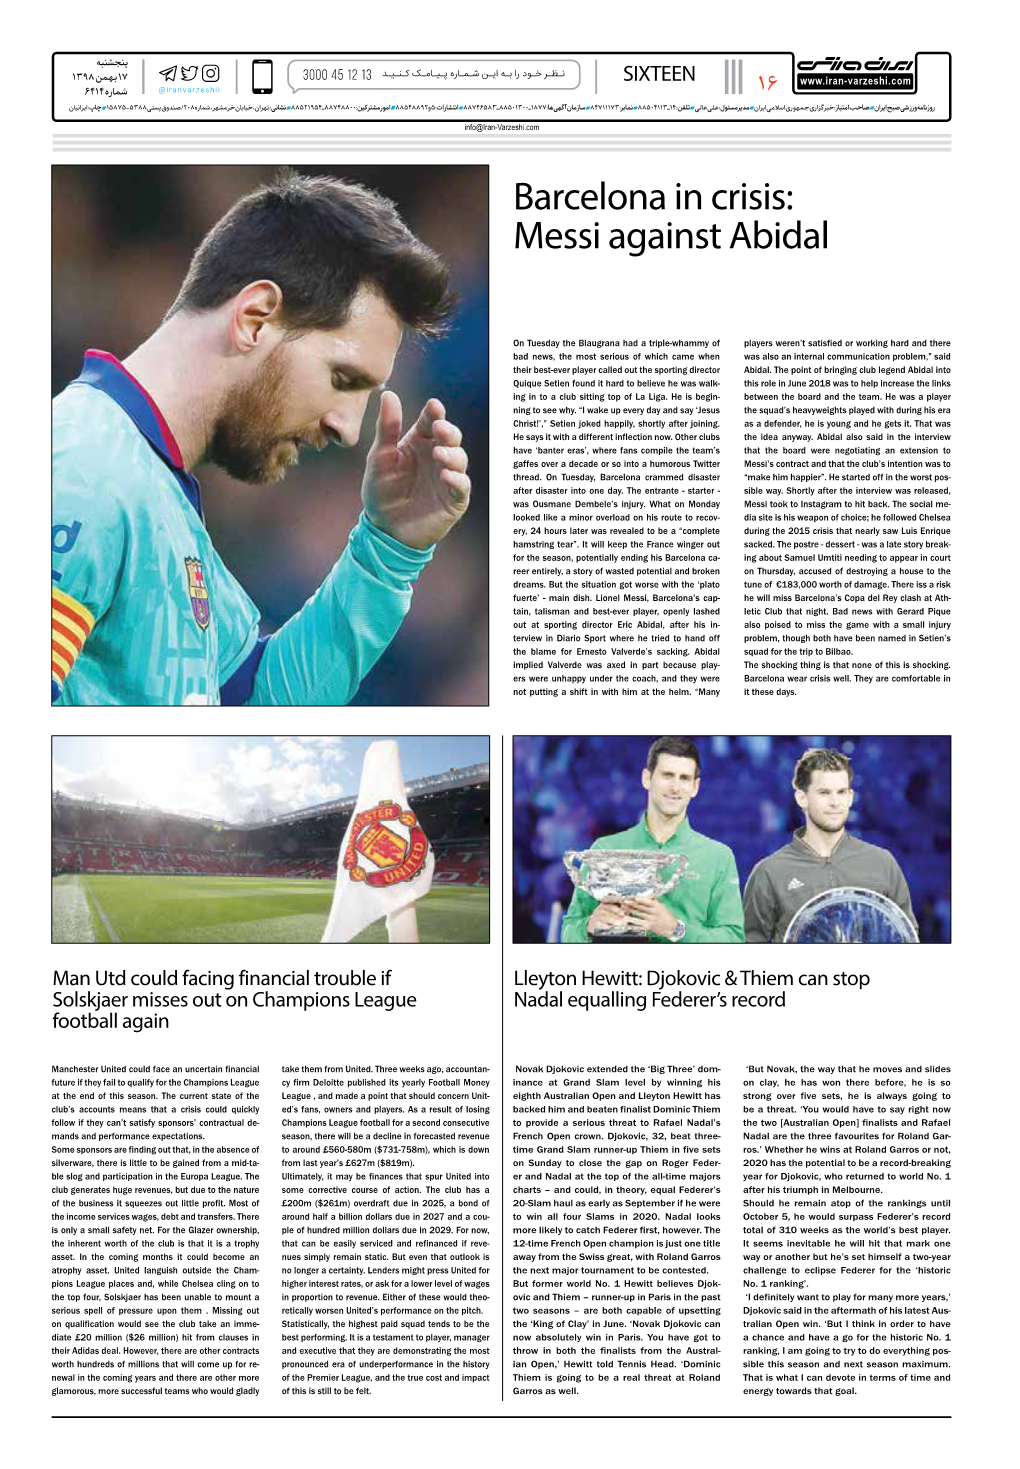 Barcelona in Crisis: Messi Against Abidal